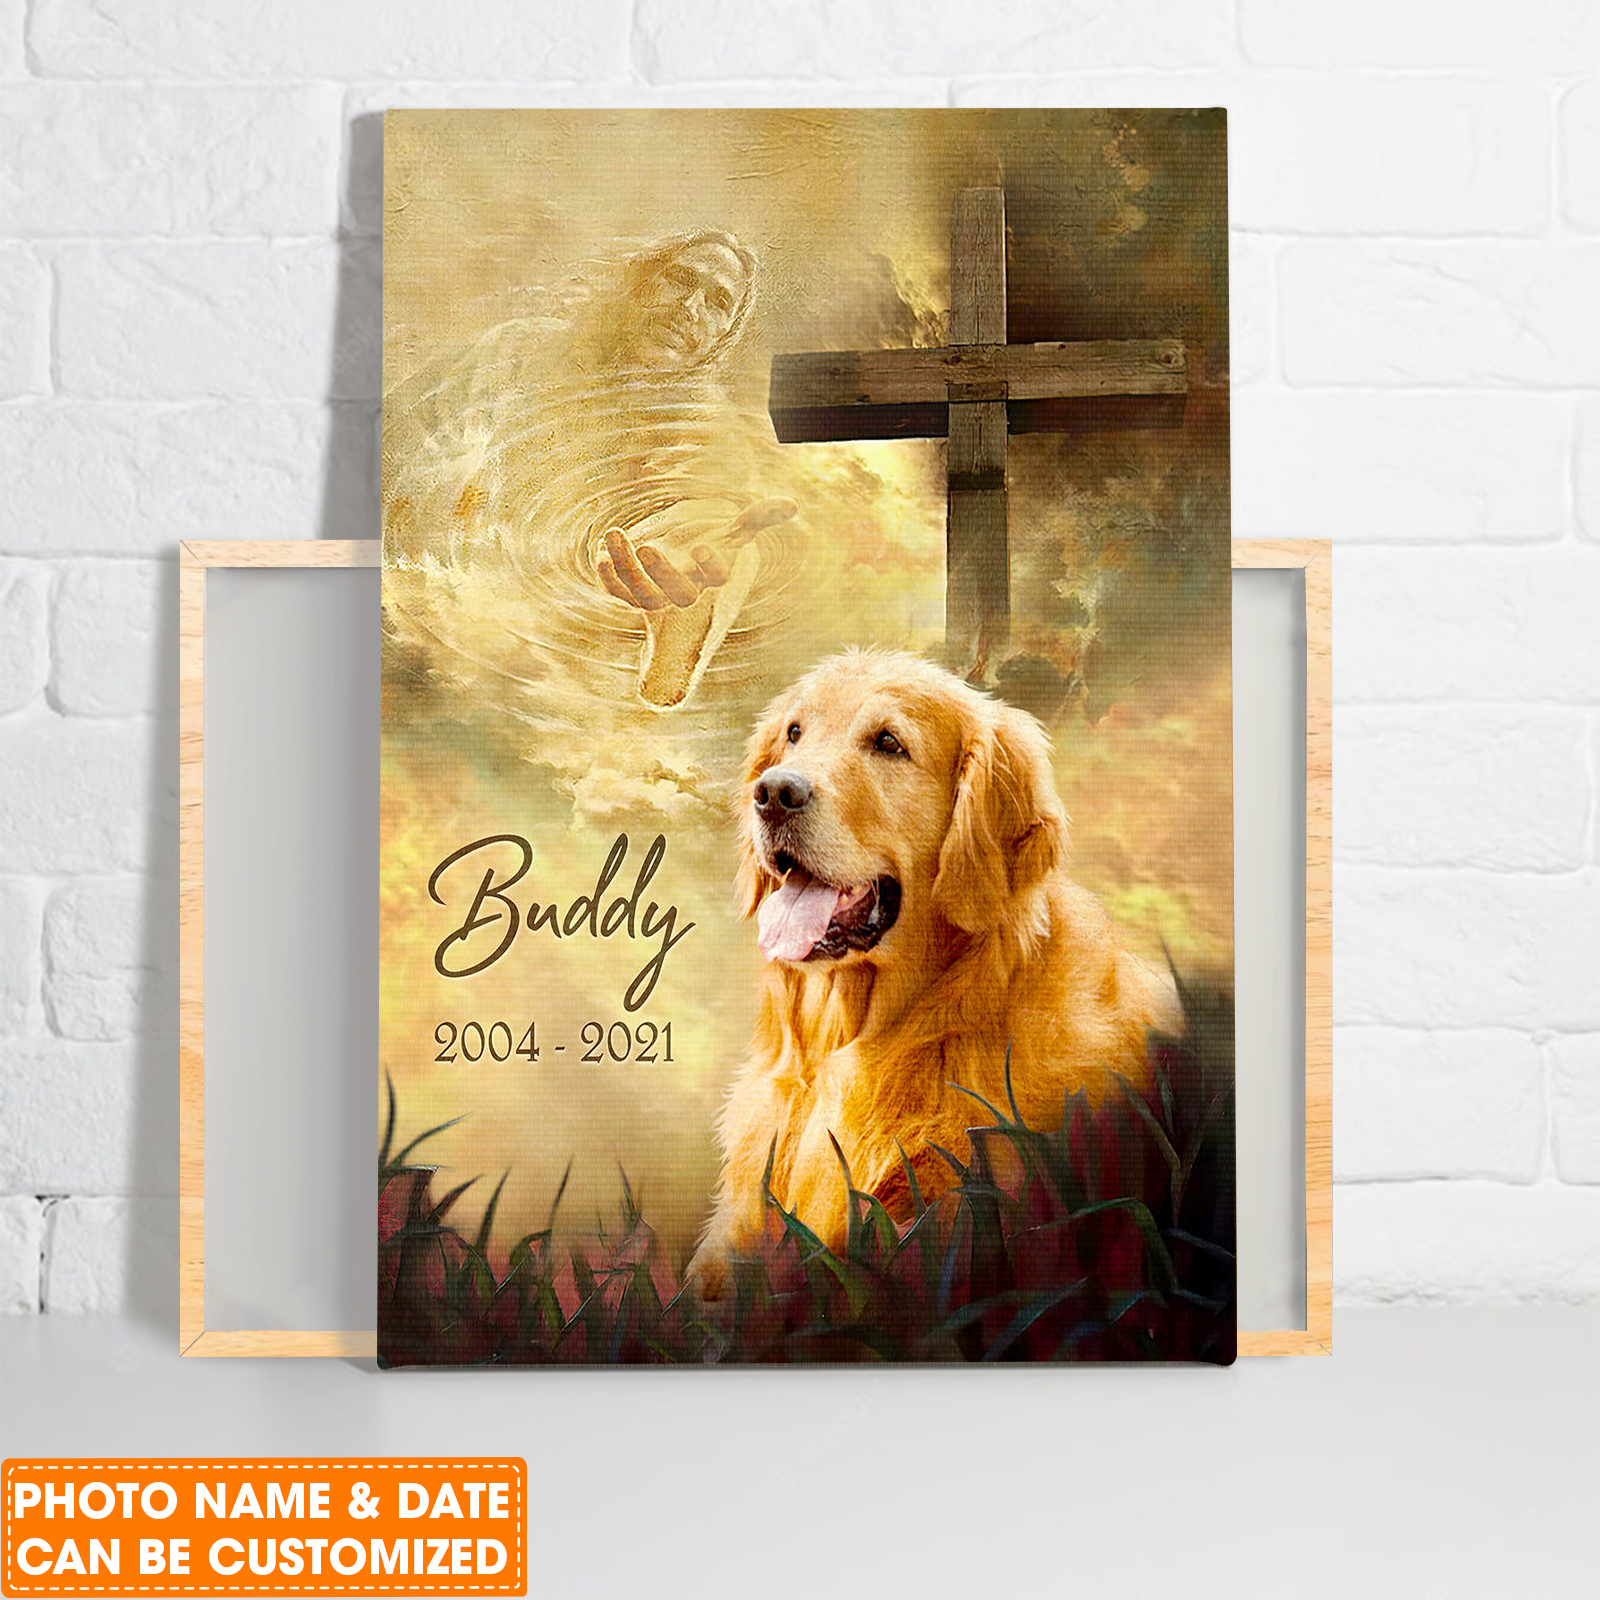 Personalized Dog Portrait Canvas, Take My Hand Jesus Canvas, Memorial Pet Canvas, Perfect Gift For Christian, Dog Lovers, Friends, Family